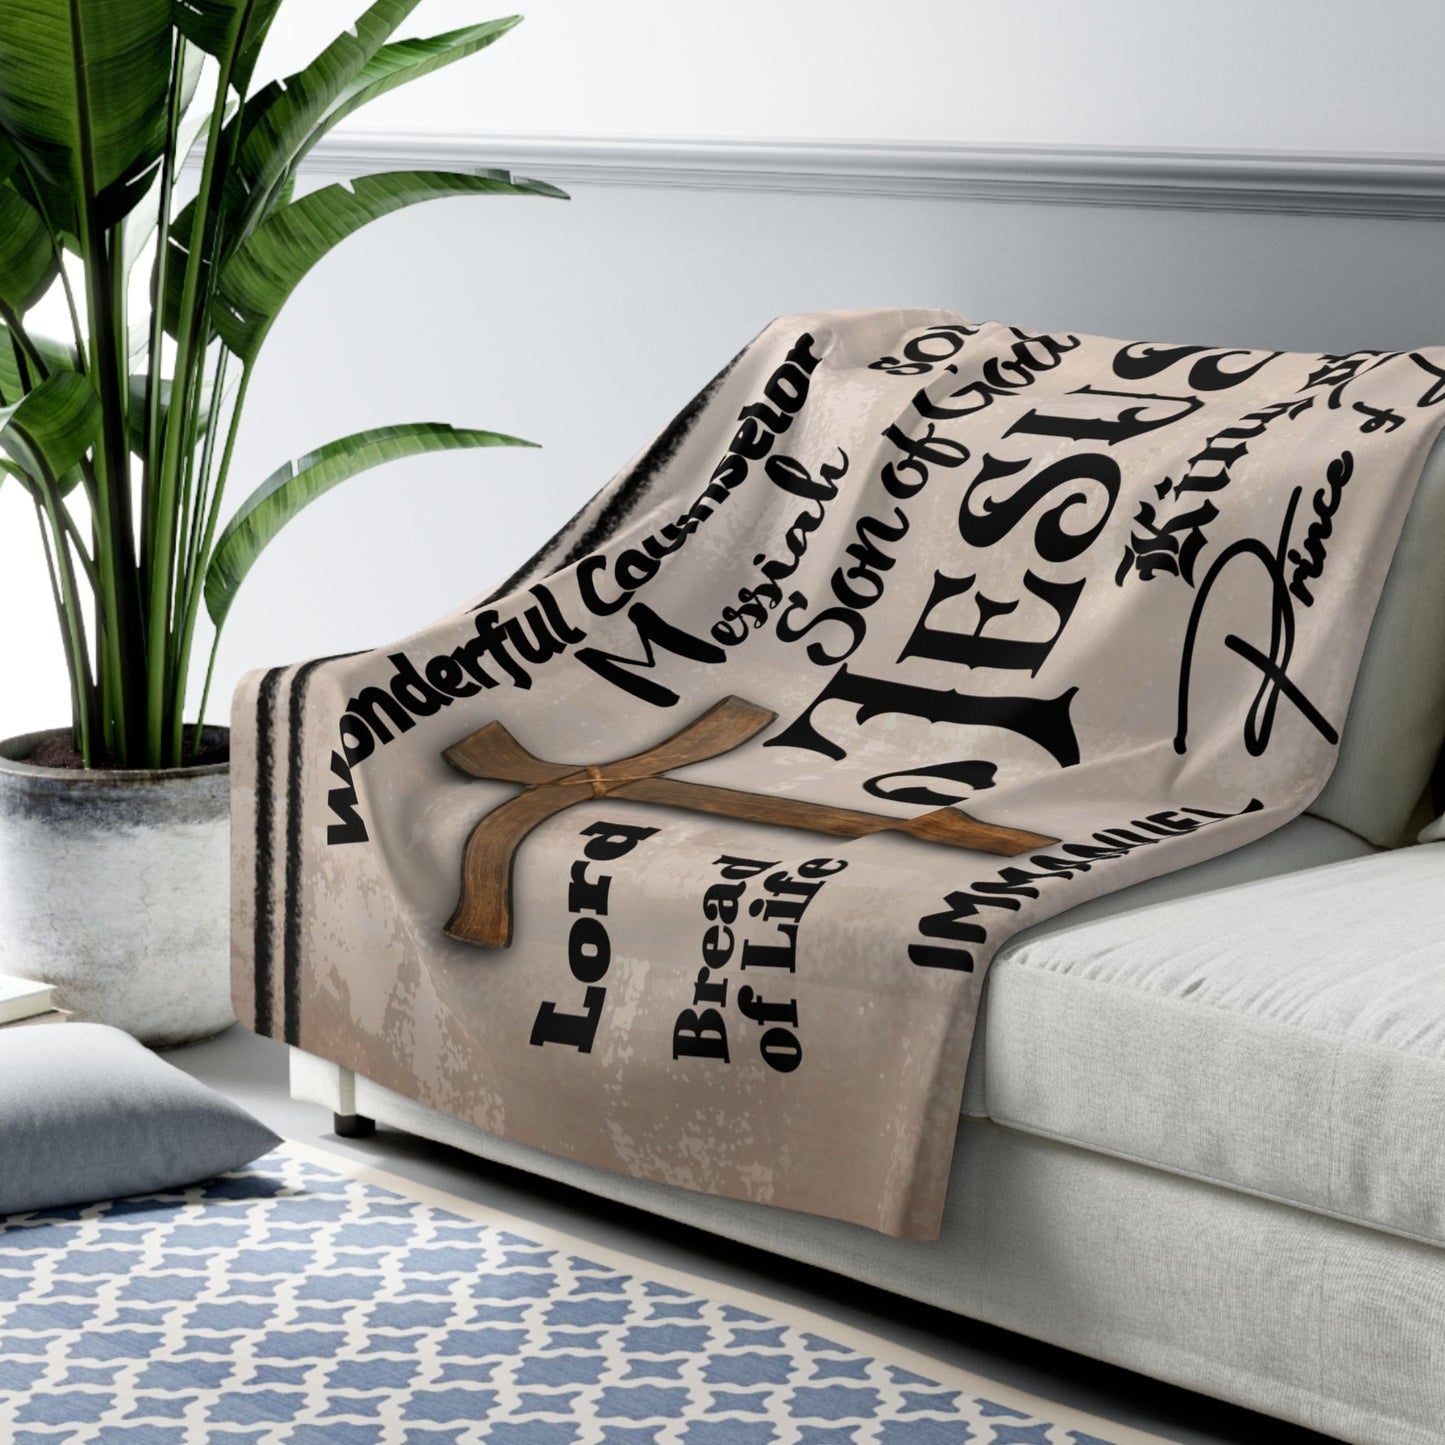 The Names of Jesus Throw is tan with black text throughout the blanket. It features a brown cross and  the names of Jesus in several different font types. Some names included are: Prince of Peace, King of Kings, Messiah, and so forth.